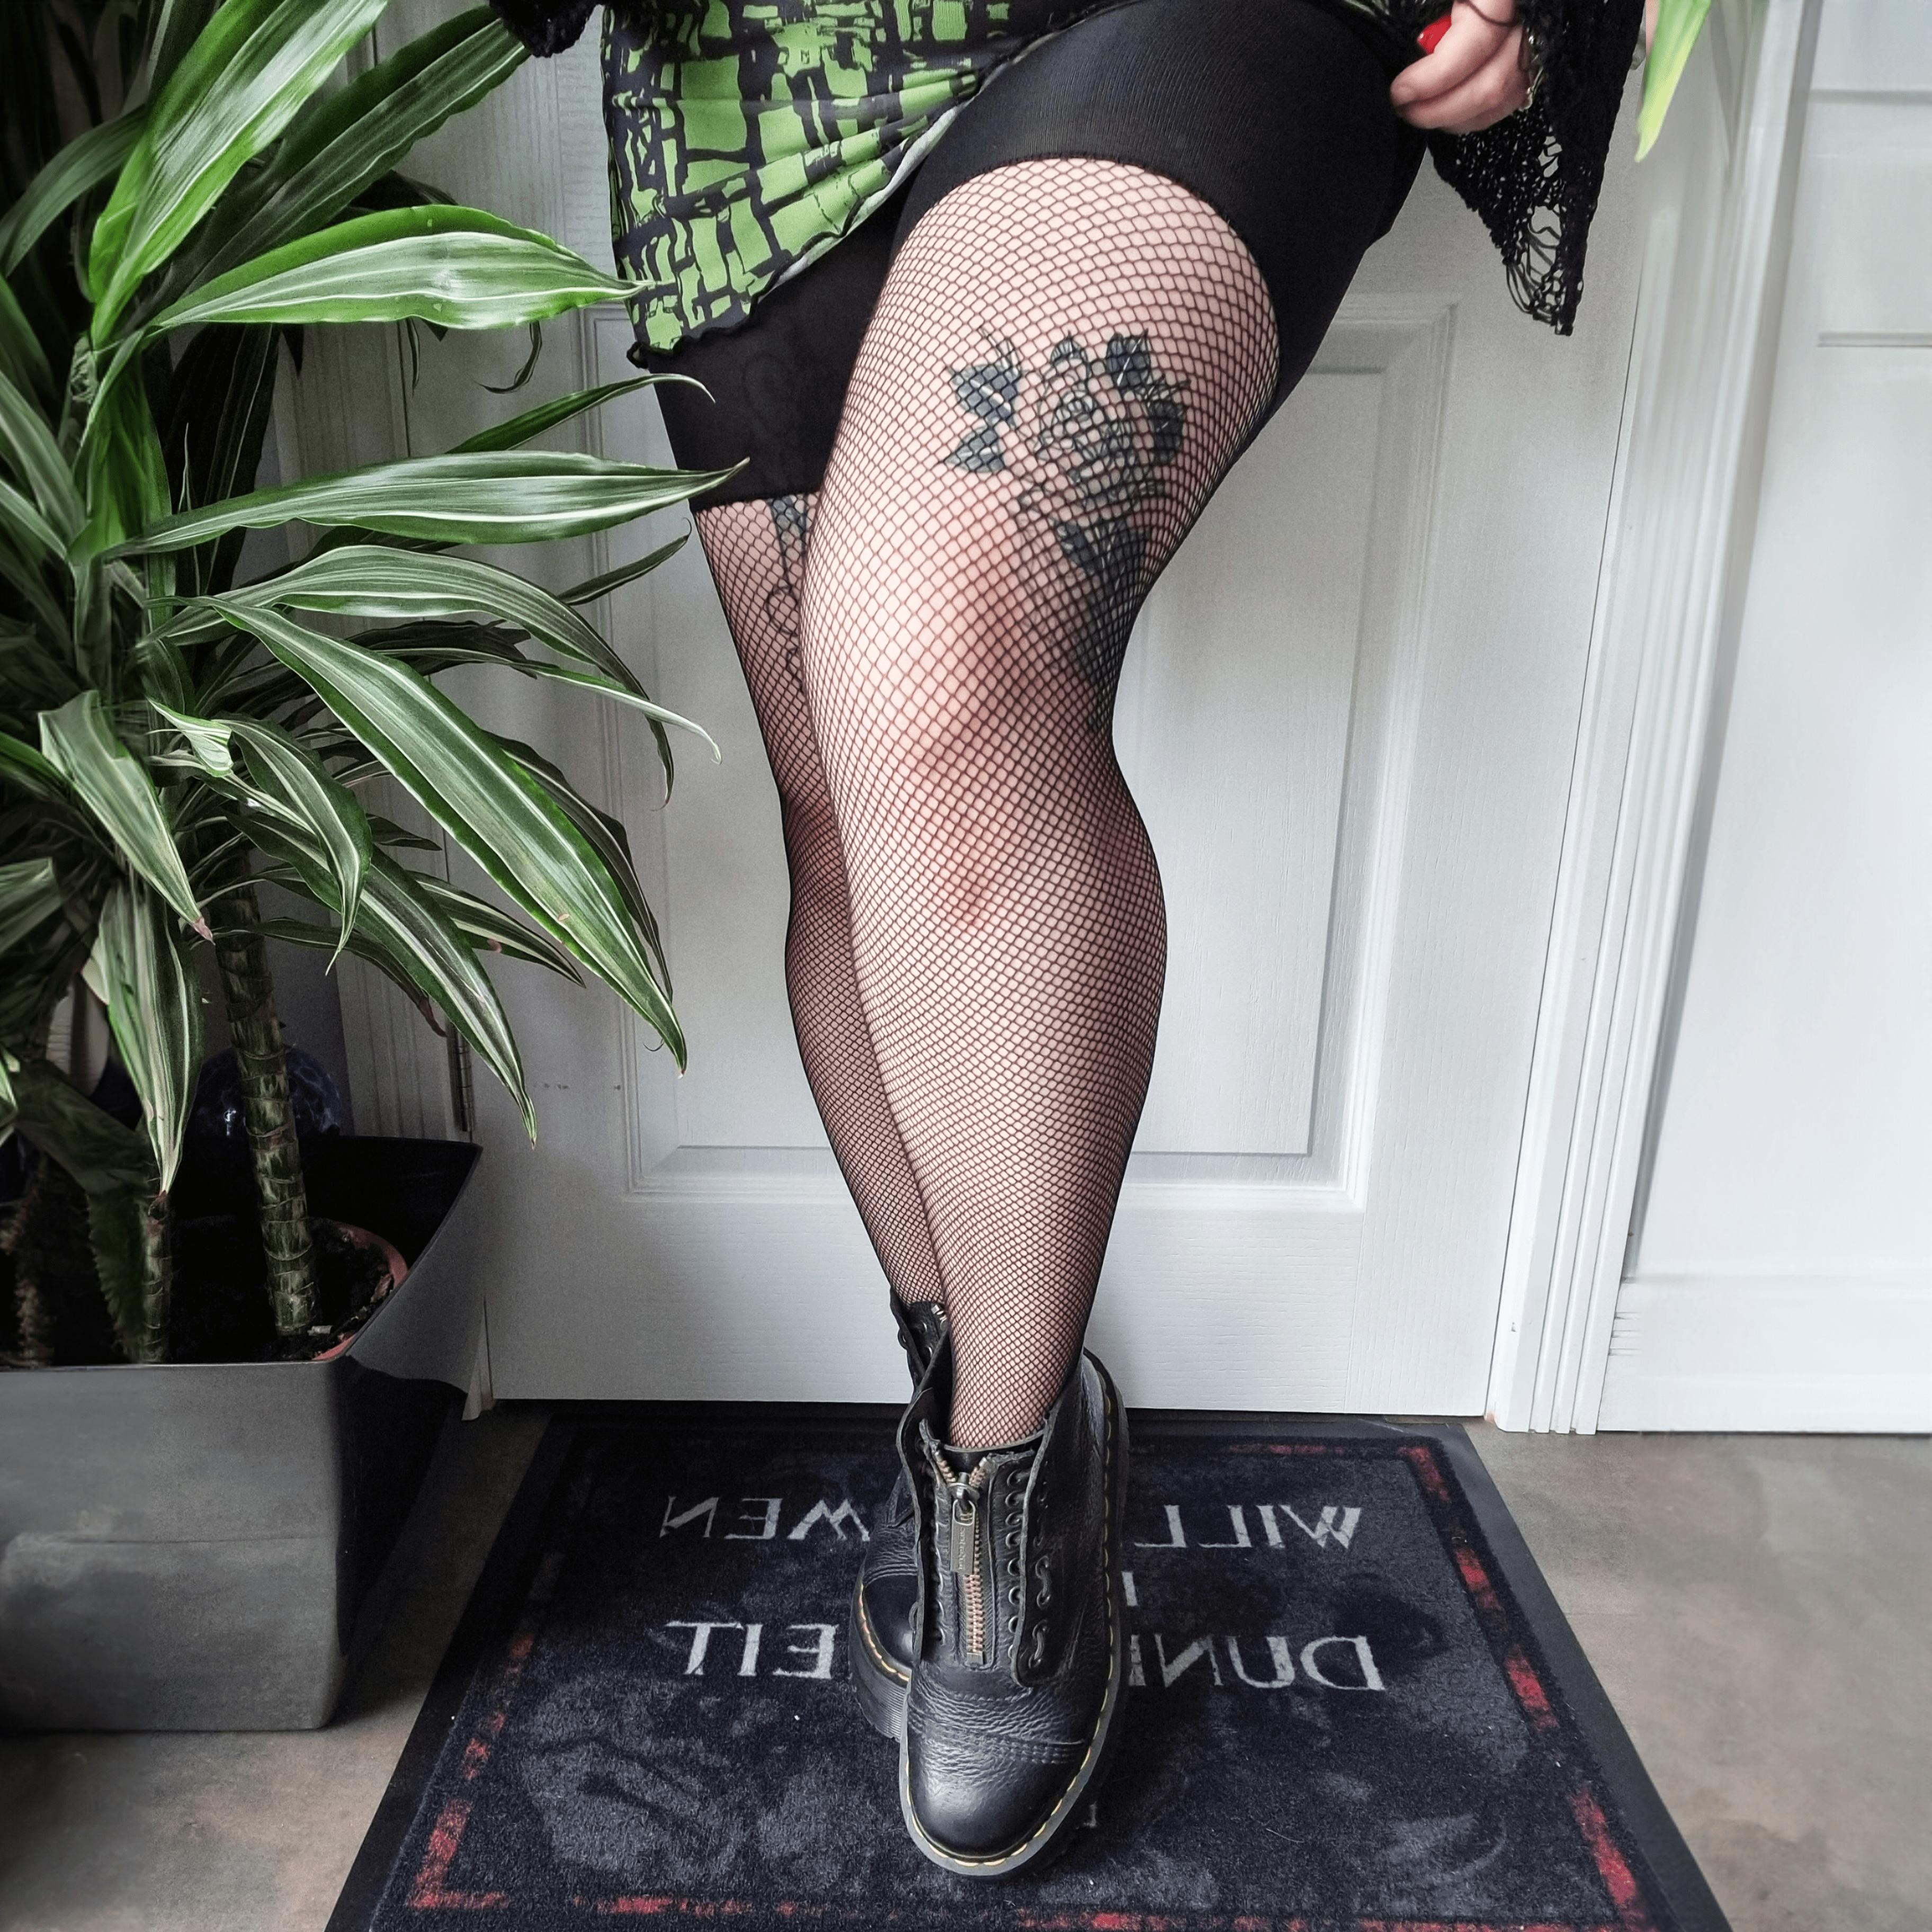 Cable Twist Tights Archives - Thighs the Limit